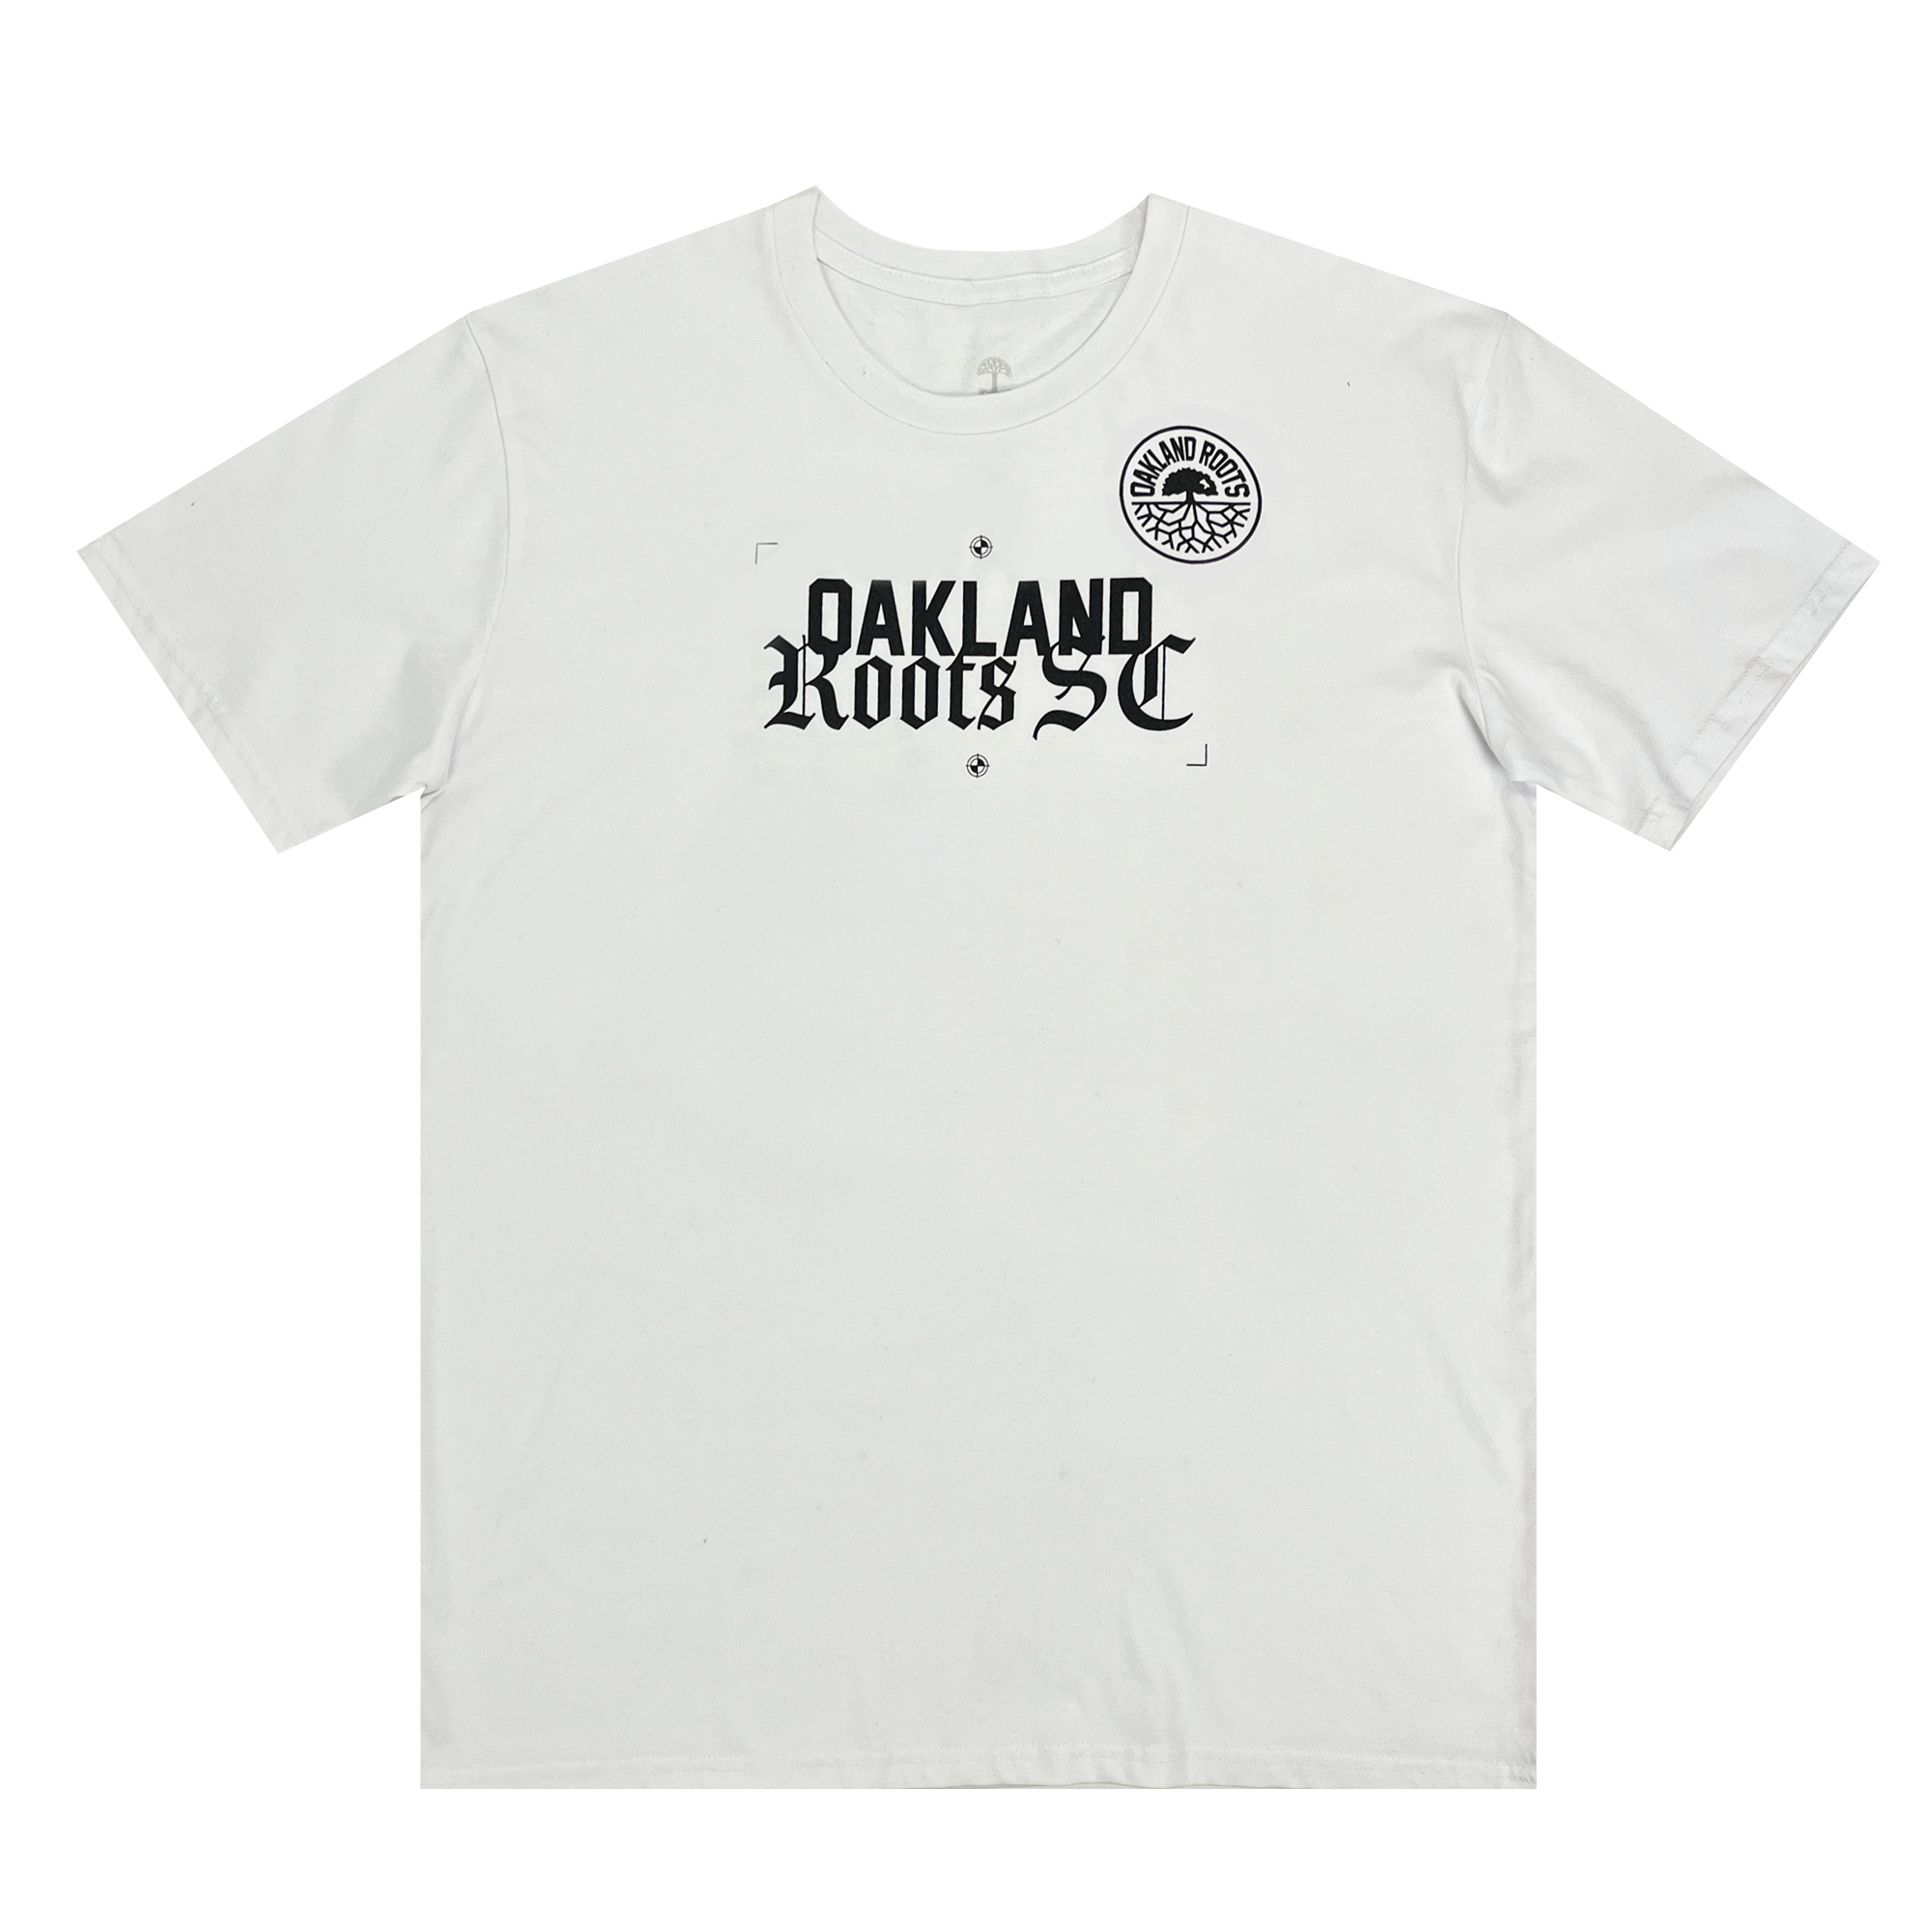 Front view of a white t-shirt with Oakland Roots SC wordmark with Old English script and black and white circle logo.